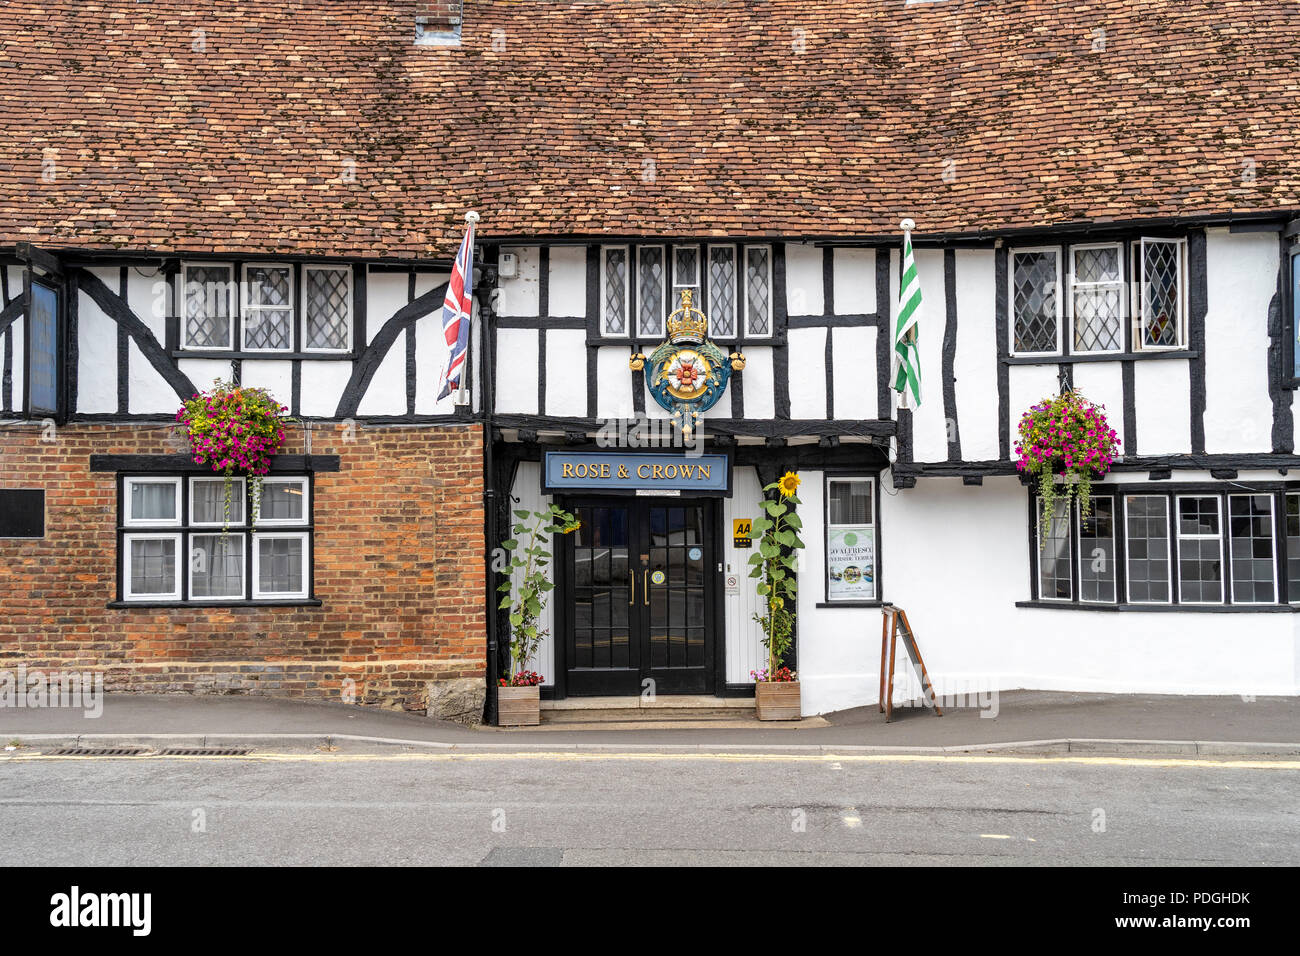 Rose and Crown Hotel 68 London Salisbury Wiltshire en Angleterre Banque D'Images